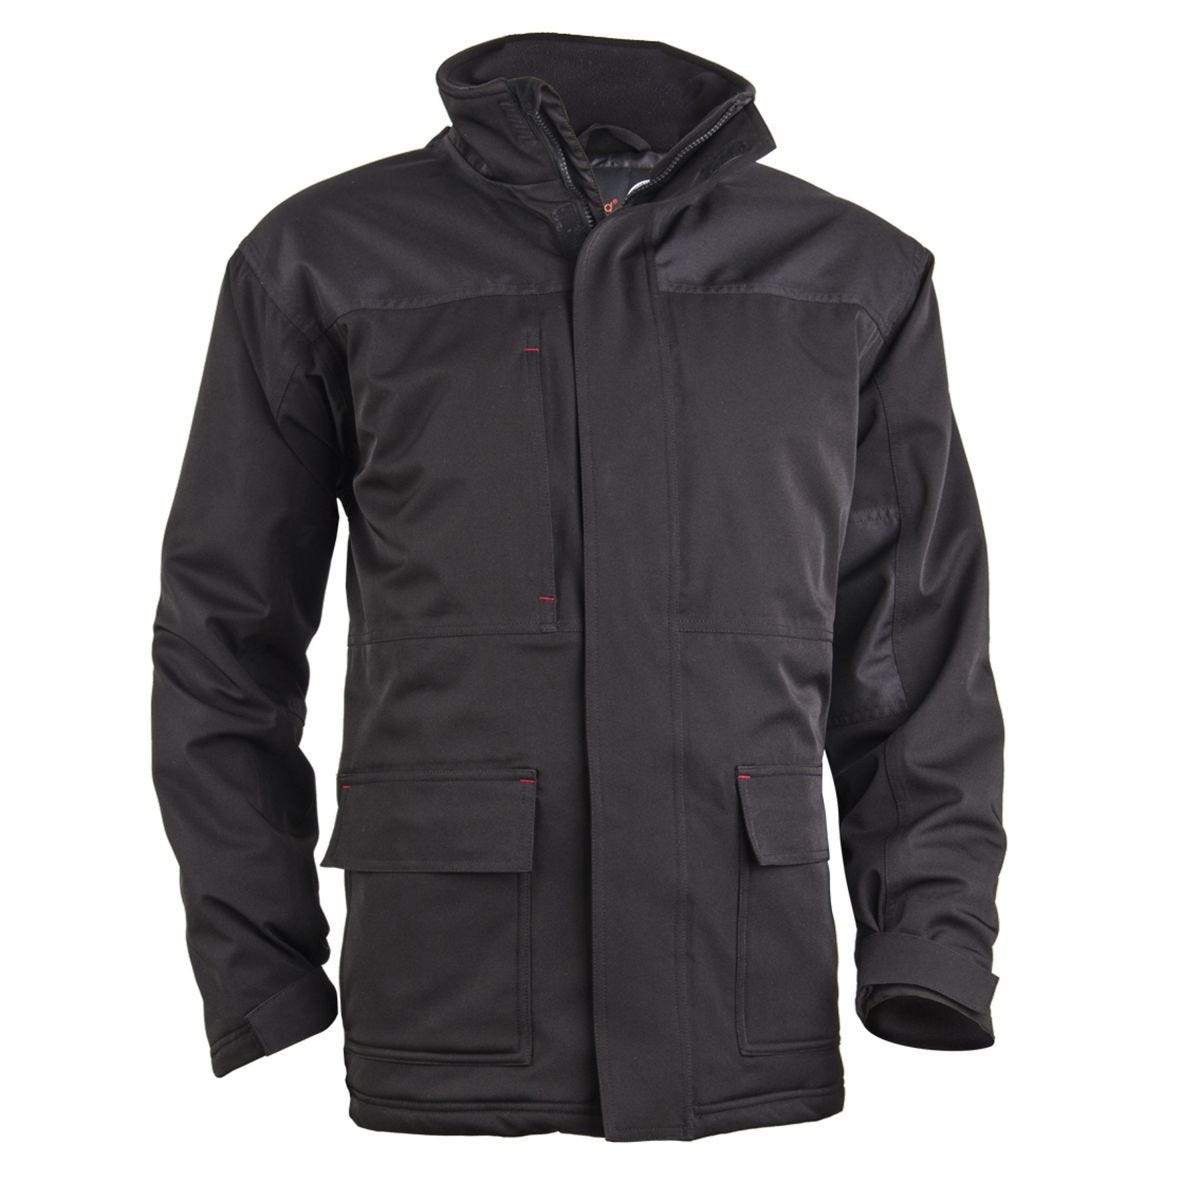 Parka YANG WINTER PRO Noire Softshell - COVERGUARD - Taille S 0